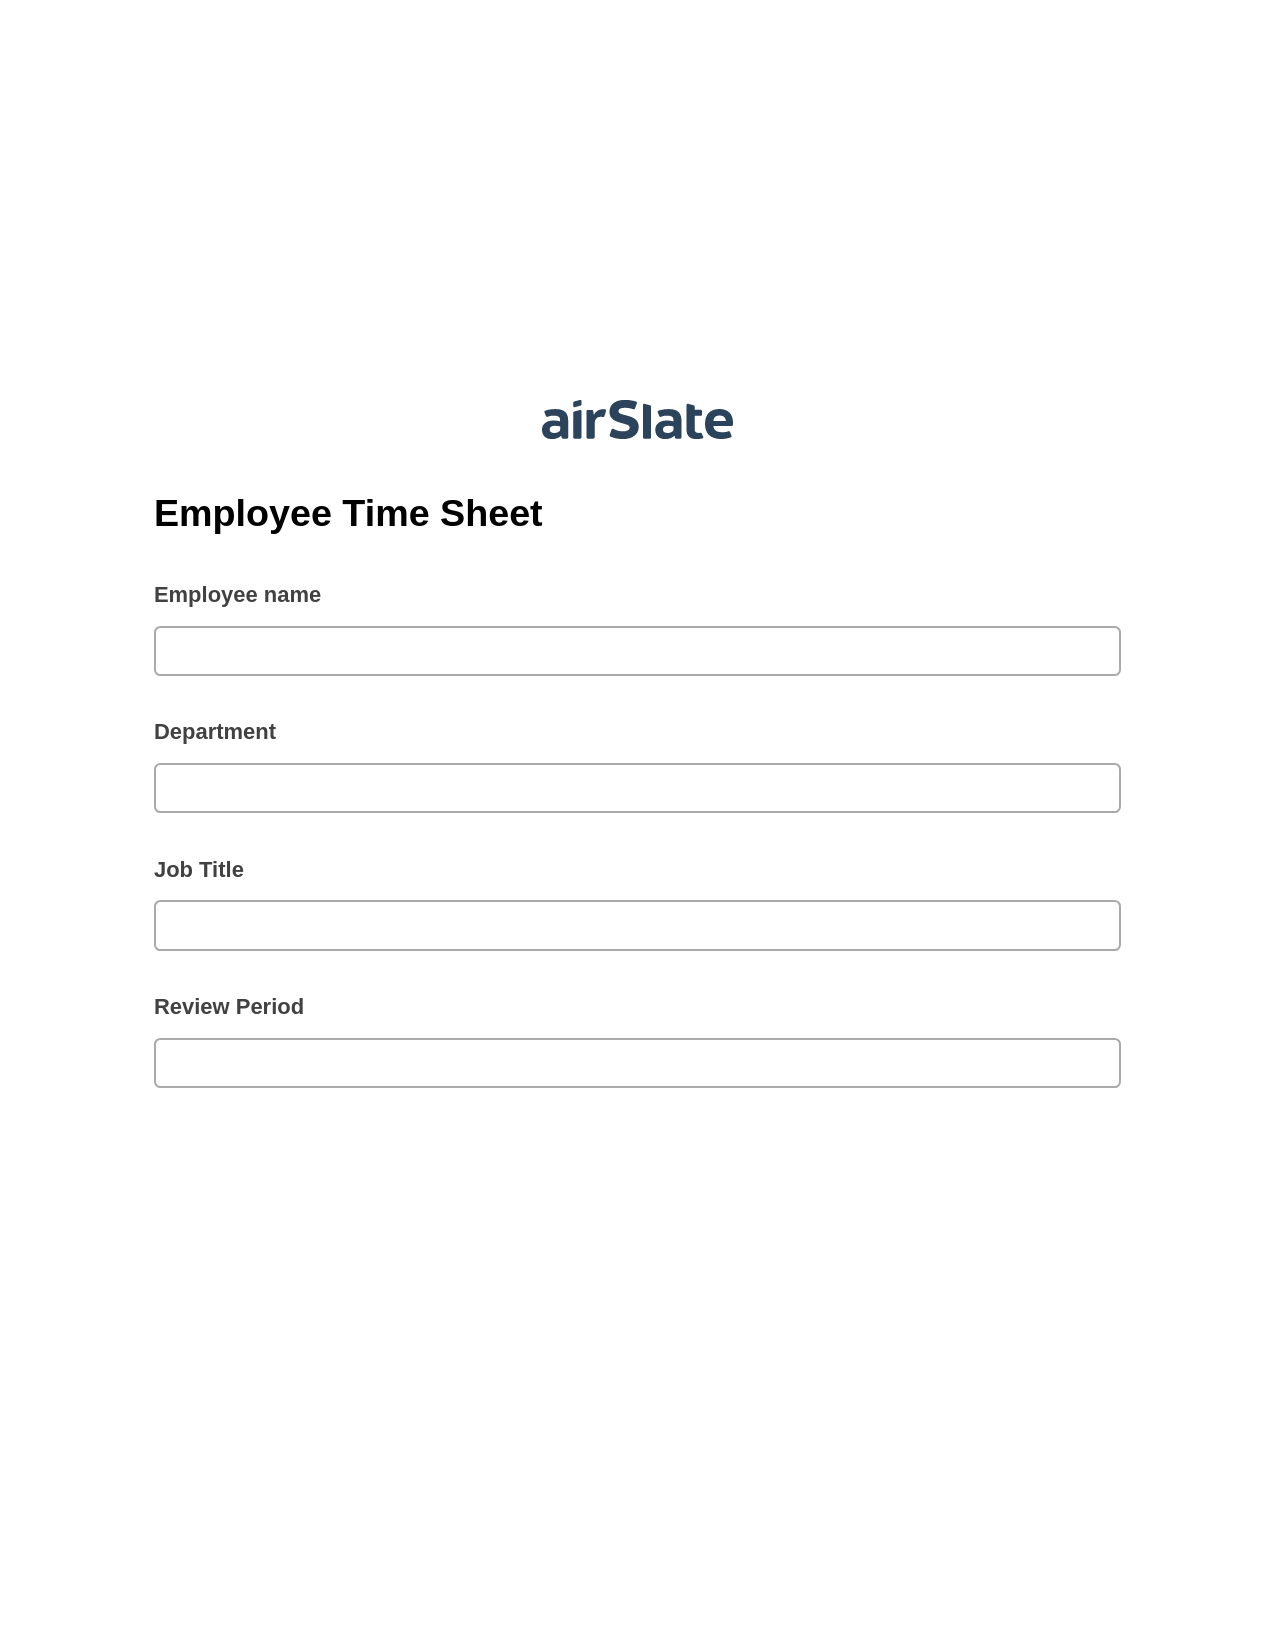 Multirole Employee Time Sheet Pre-fill from MS Dynamics 365 Records, Create slate addon, Export to Excel 365 Bot